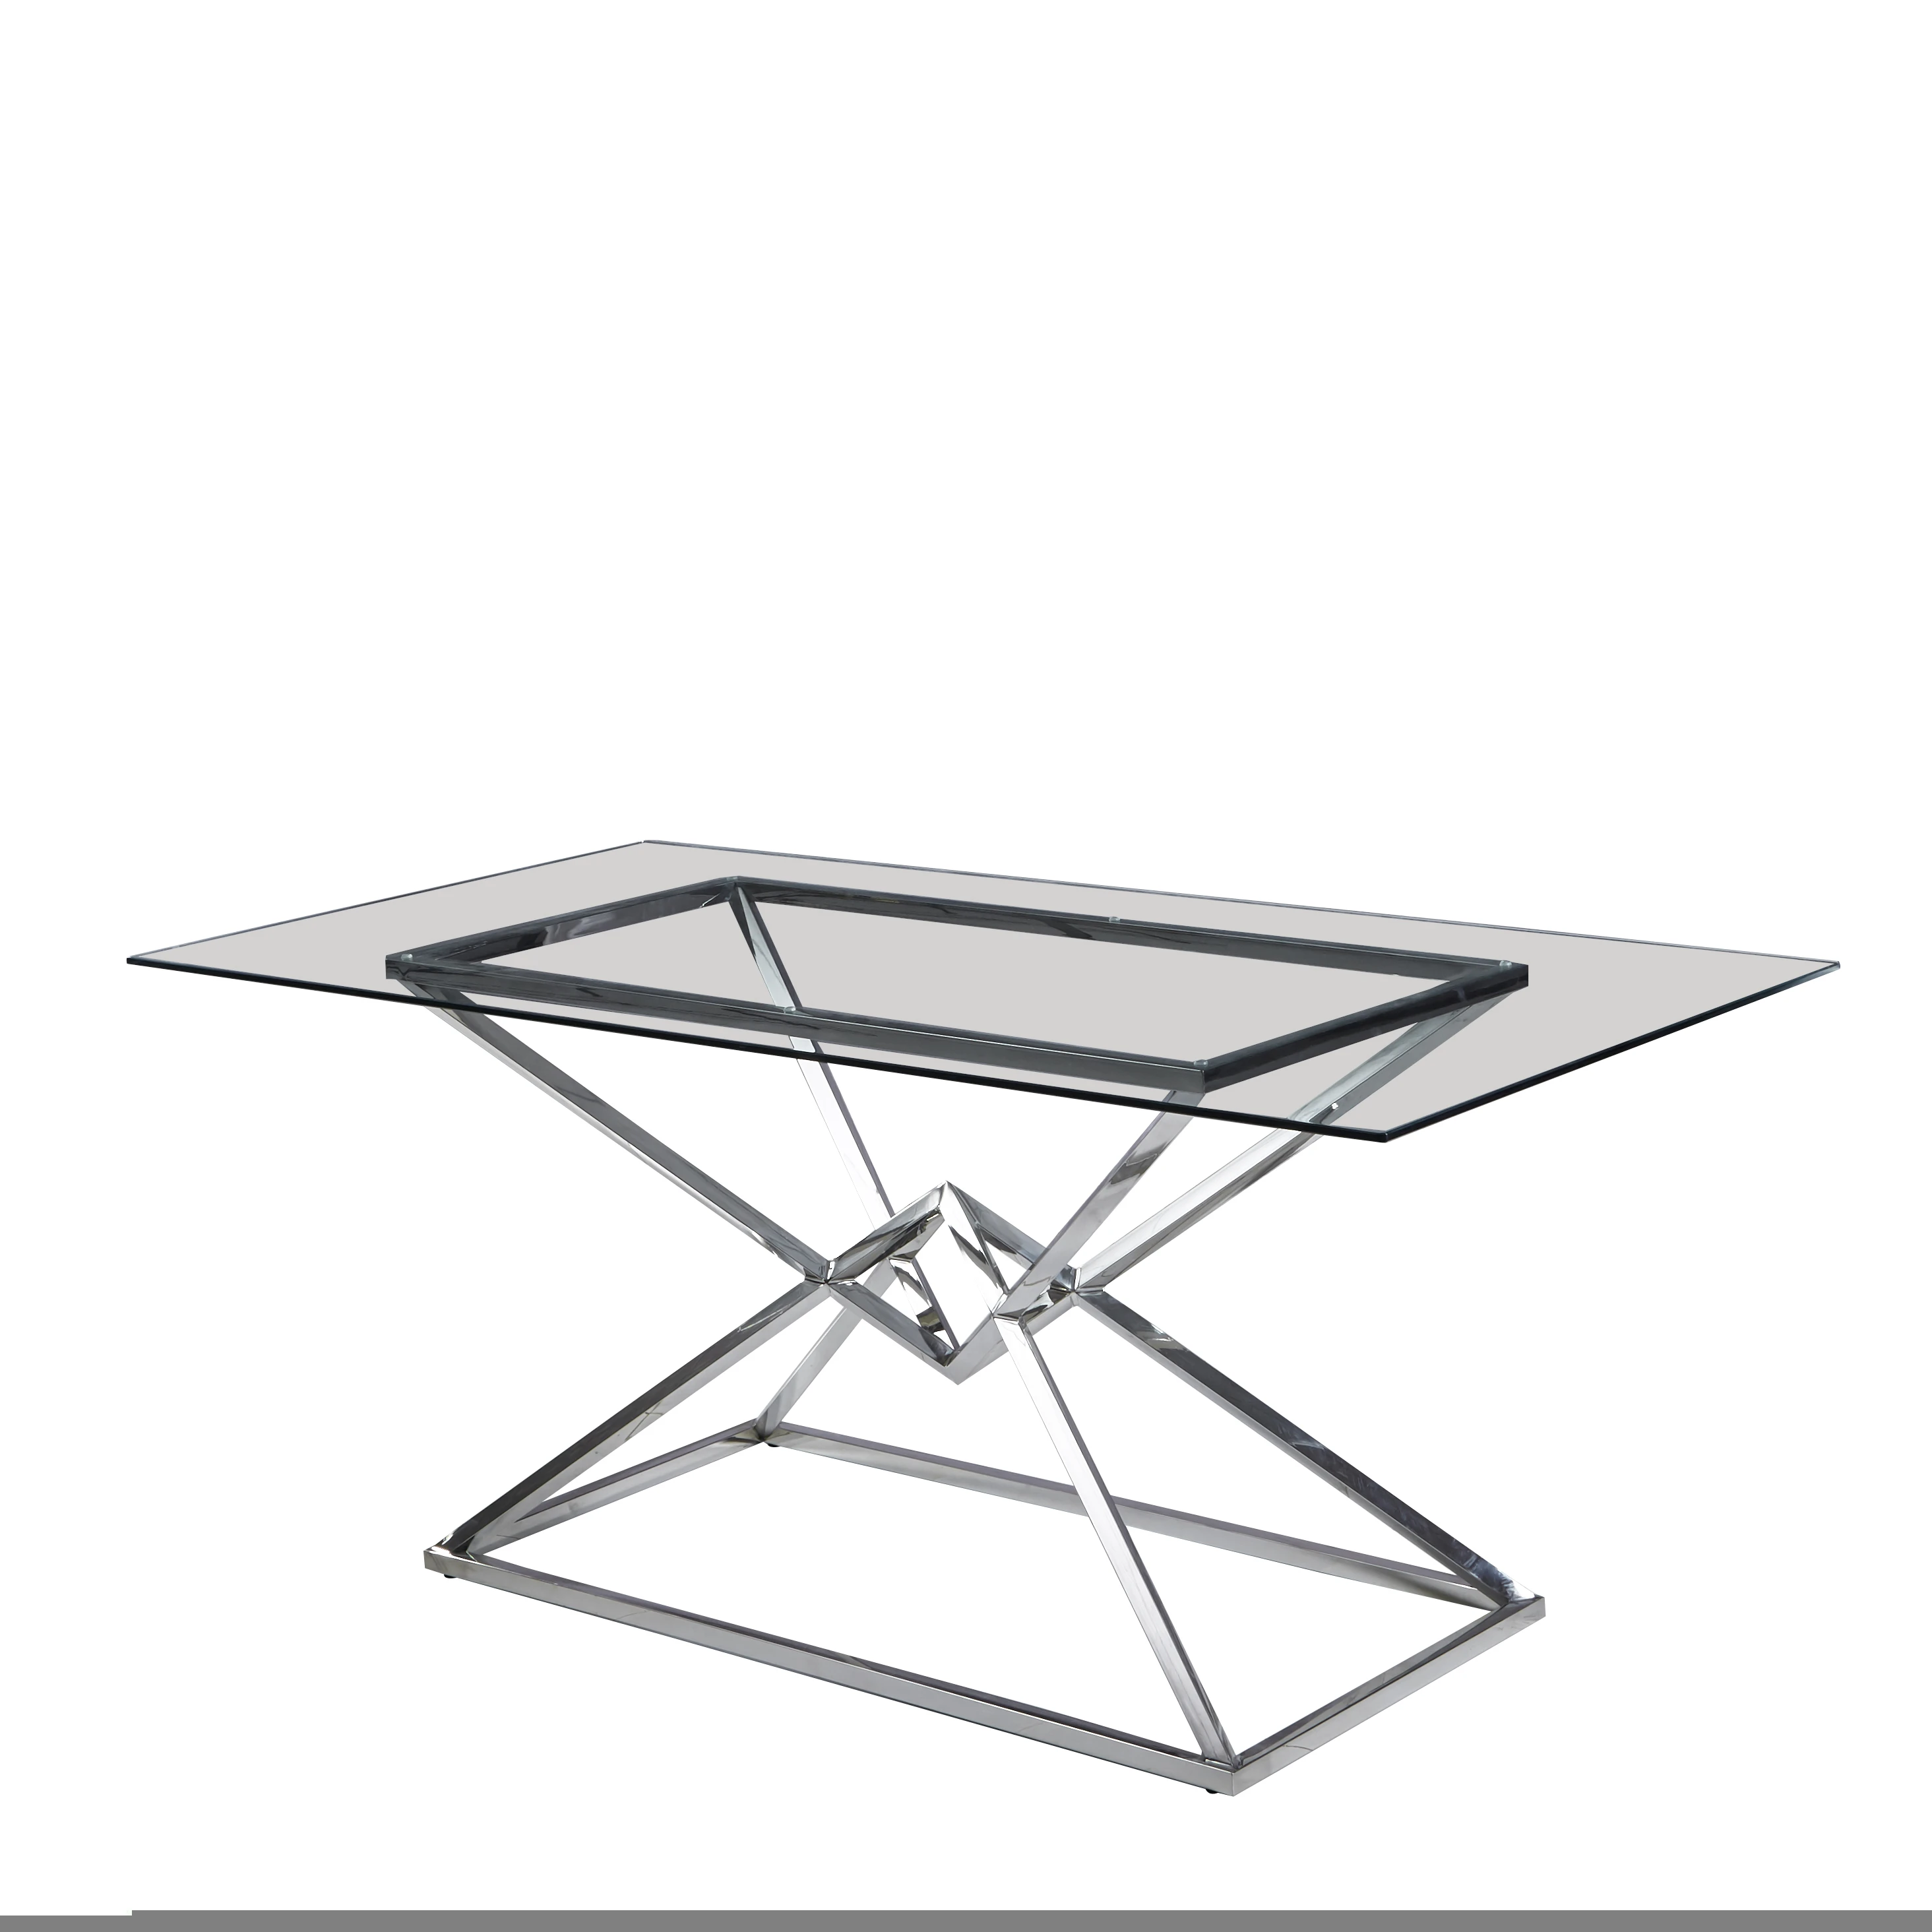 2021 top-rated European dining room dining table with stainless steel modern tempered glass